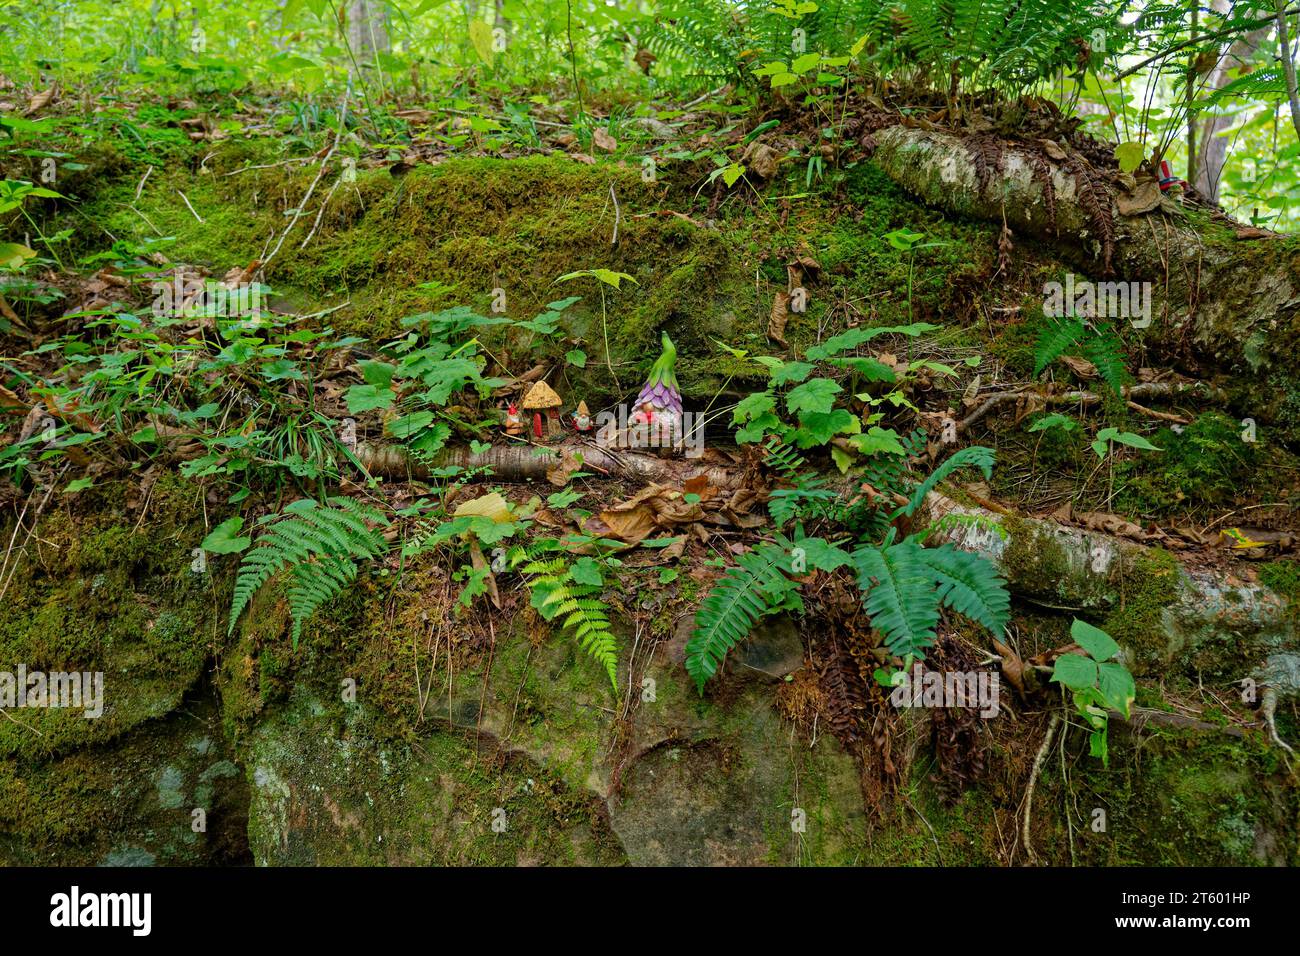 Gnomes found sitting on the boulder with vegetation in the shade in the forest in late summertime Stock Photo